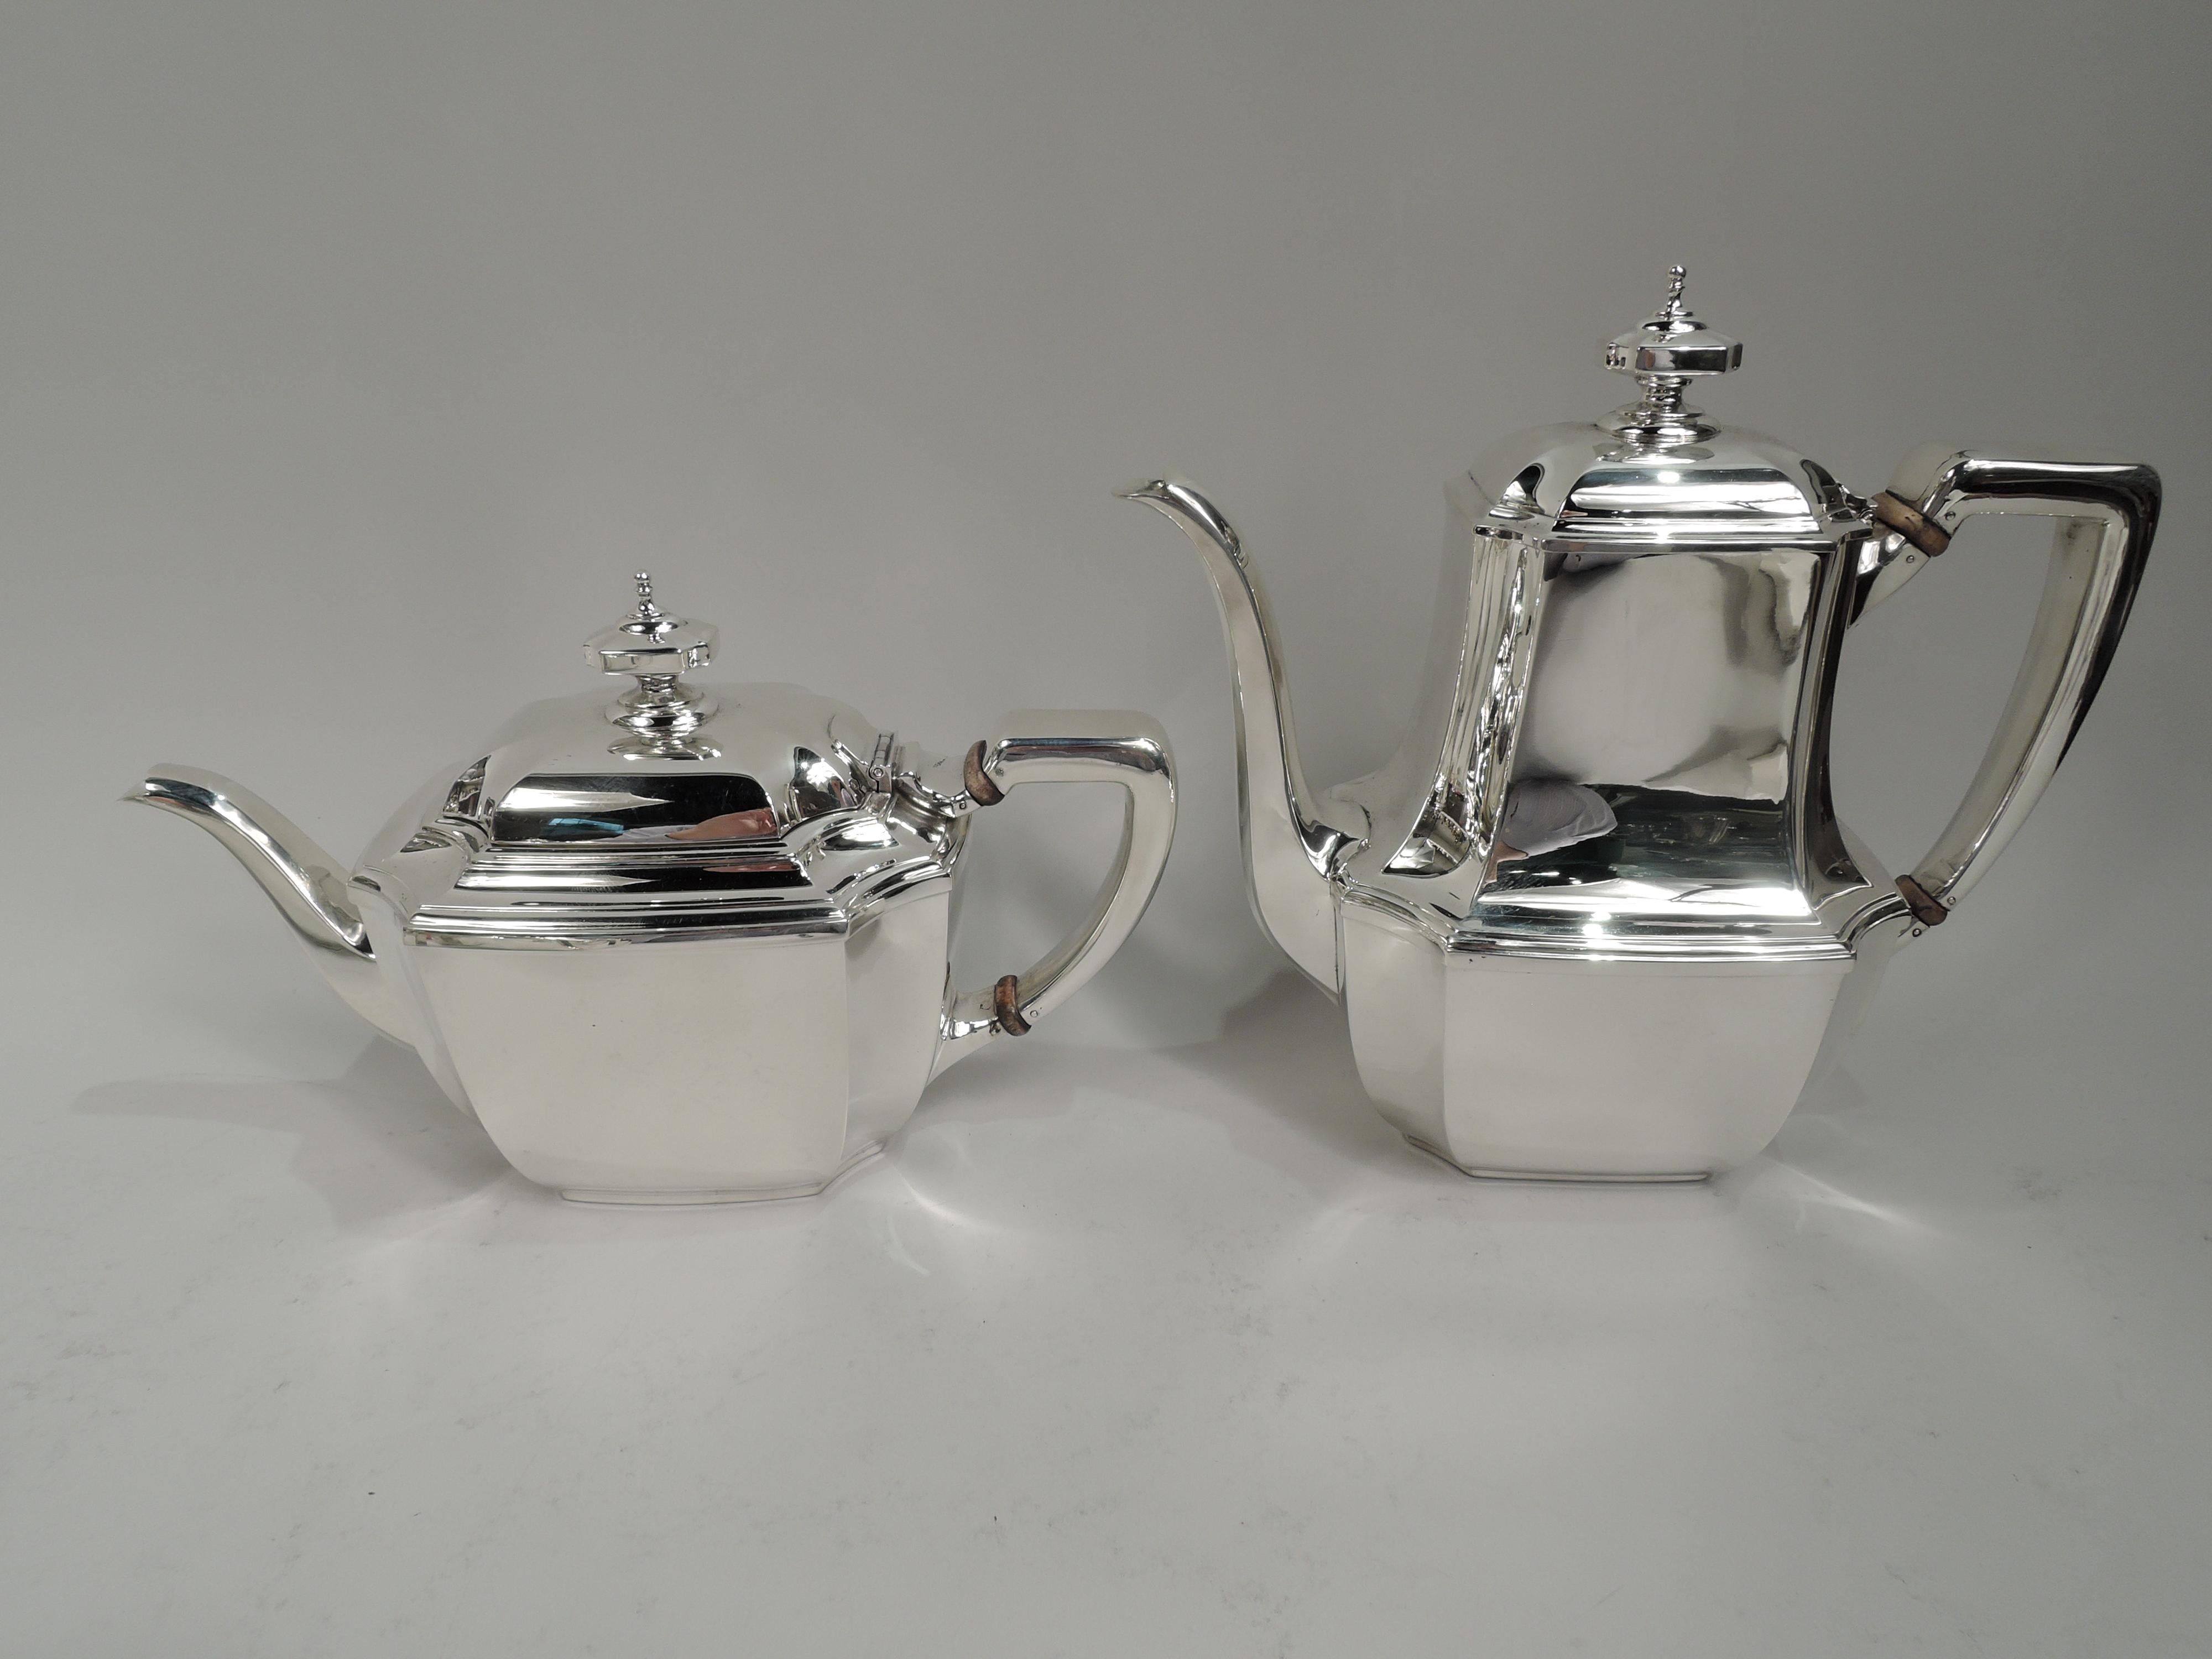 Hampton sterling silver coffee and tea set. Made by Tiffany & Co. in New York. This set comprises 5 pieces: Coffeepot, teapot, creamer, sugar, and waste bowl. Rectilinear with concave corners, and stepped rim. Covers stepped and concave with finial